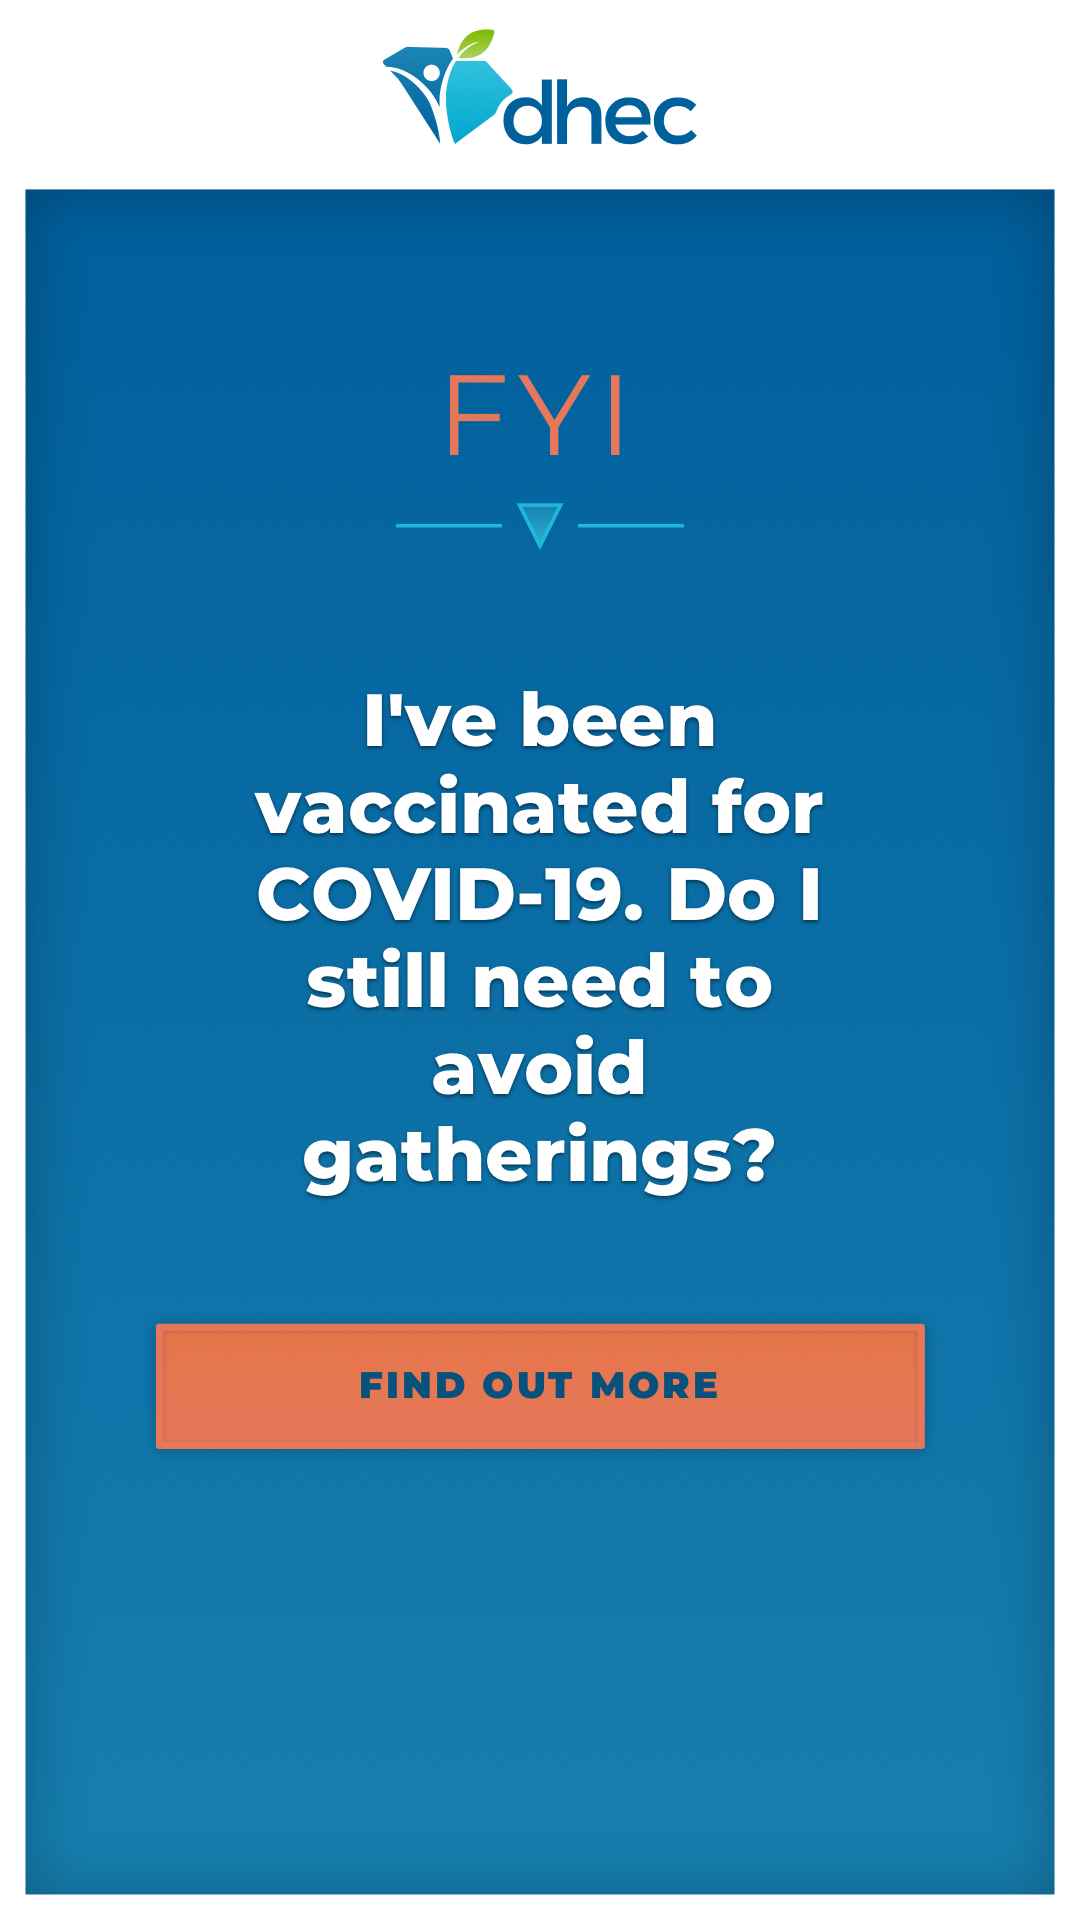 I've been vaccinated for COVID-19. Do I still need to avoid gatherings?